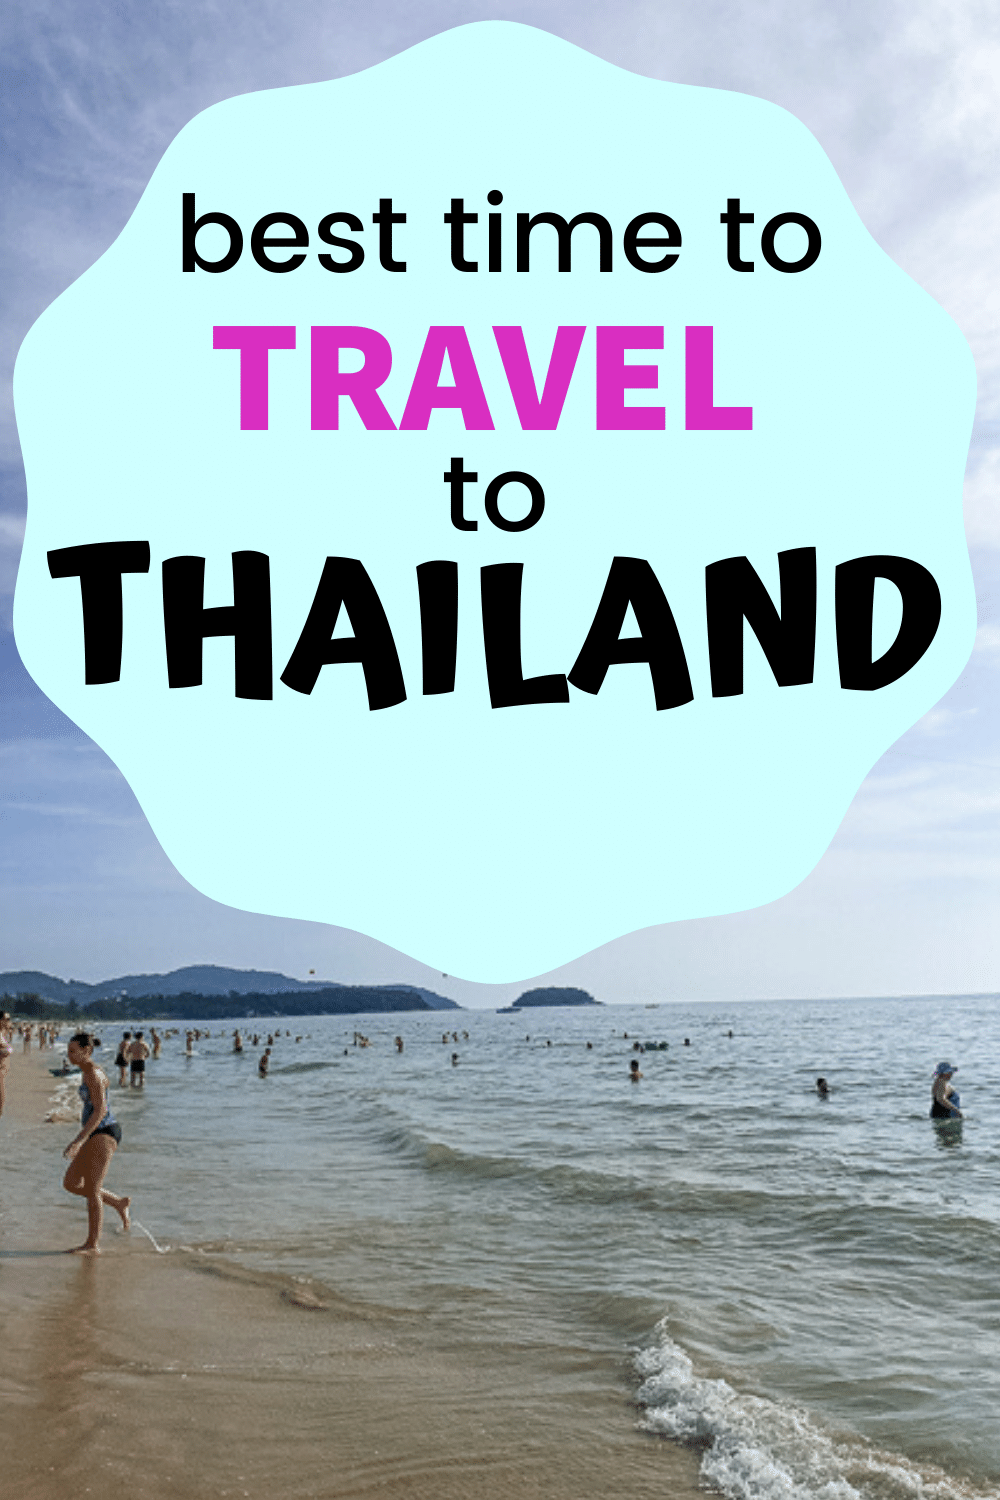 When is the best time to travel to Thailand